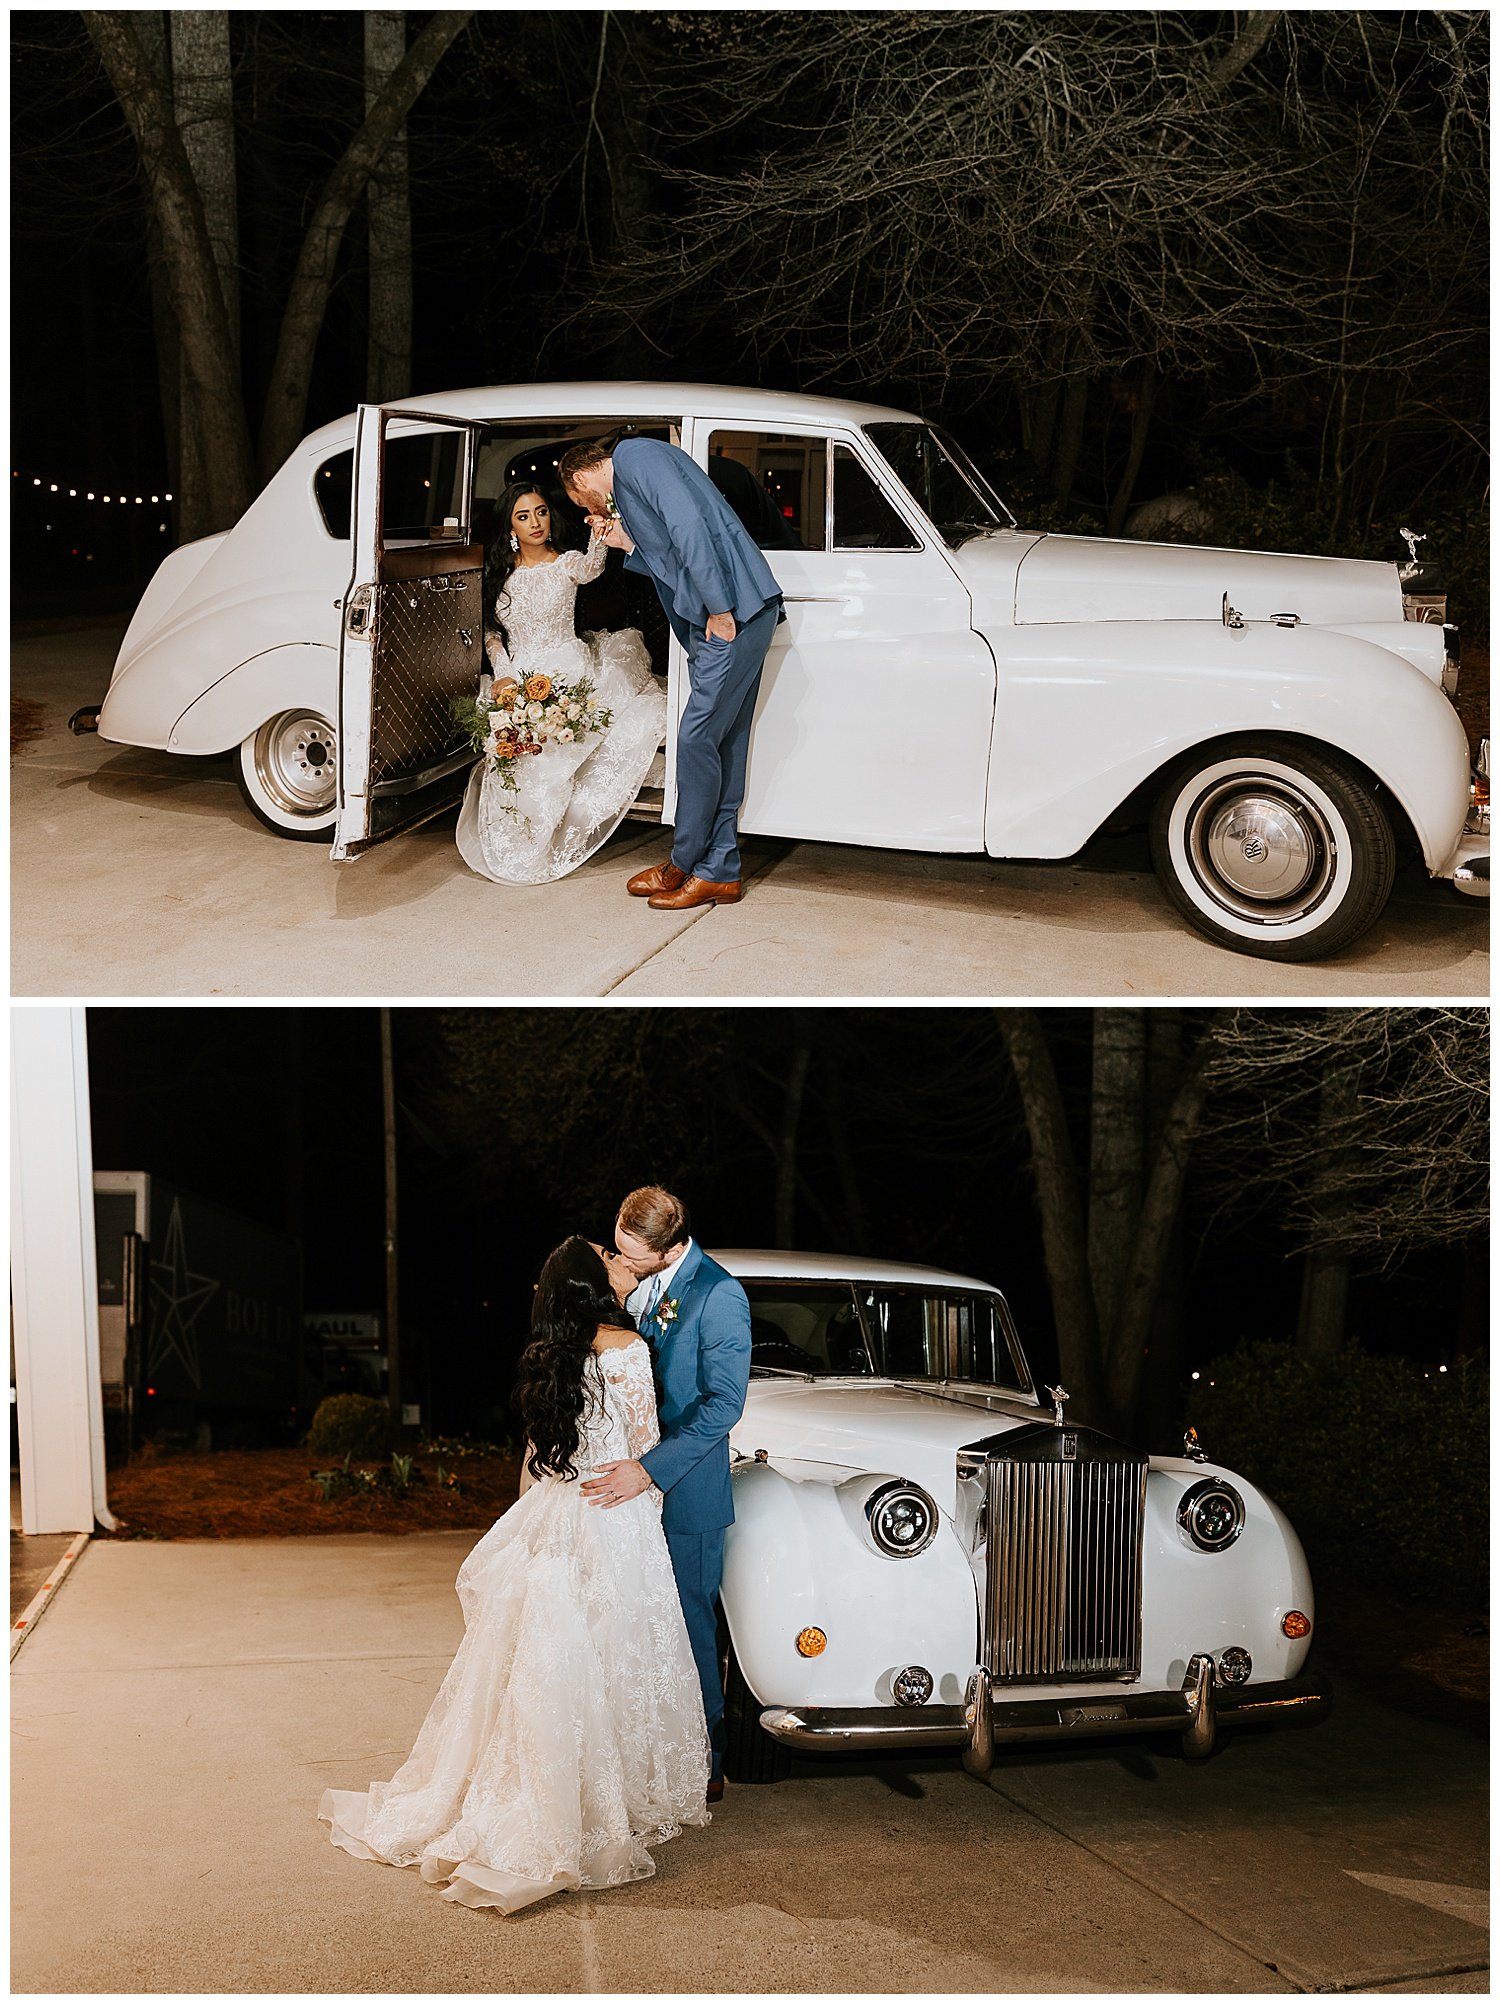 classic elegance white vintage rolls royce car with a bride and groom portraits at night